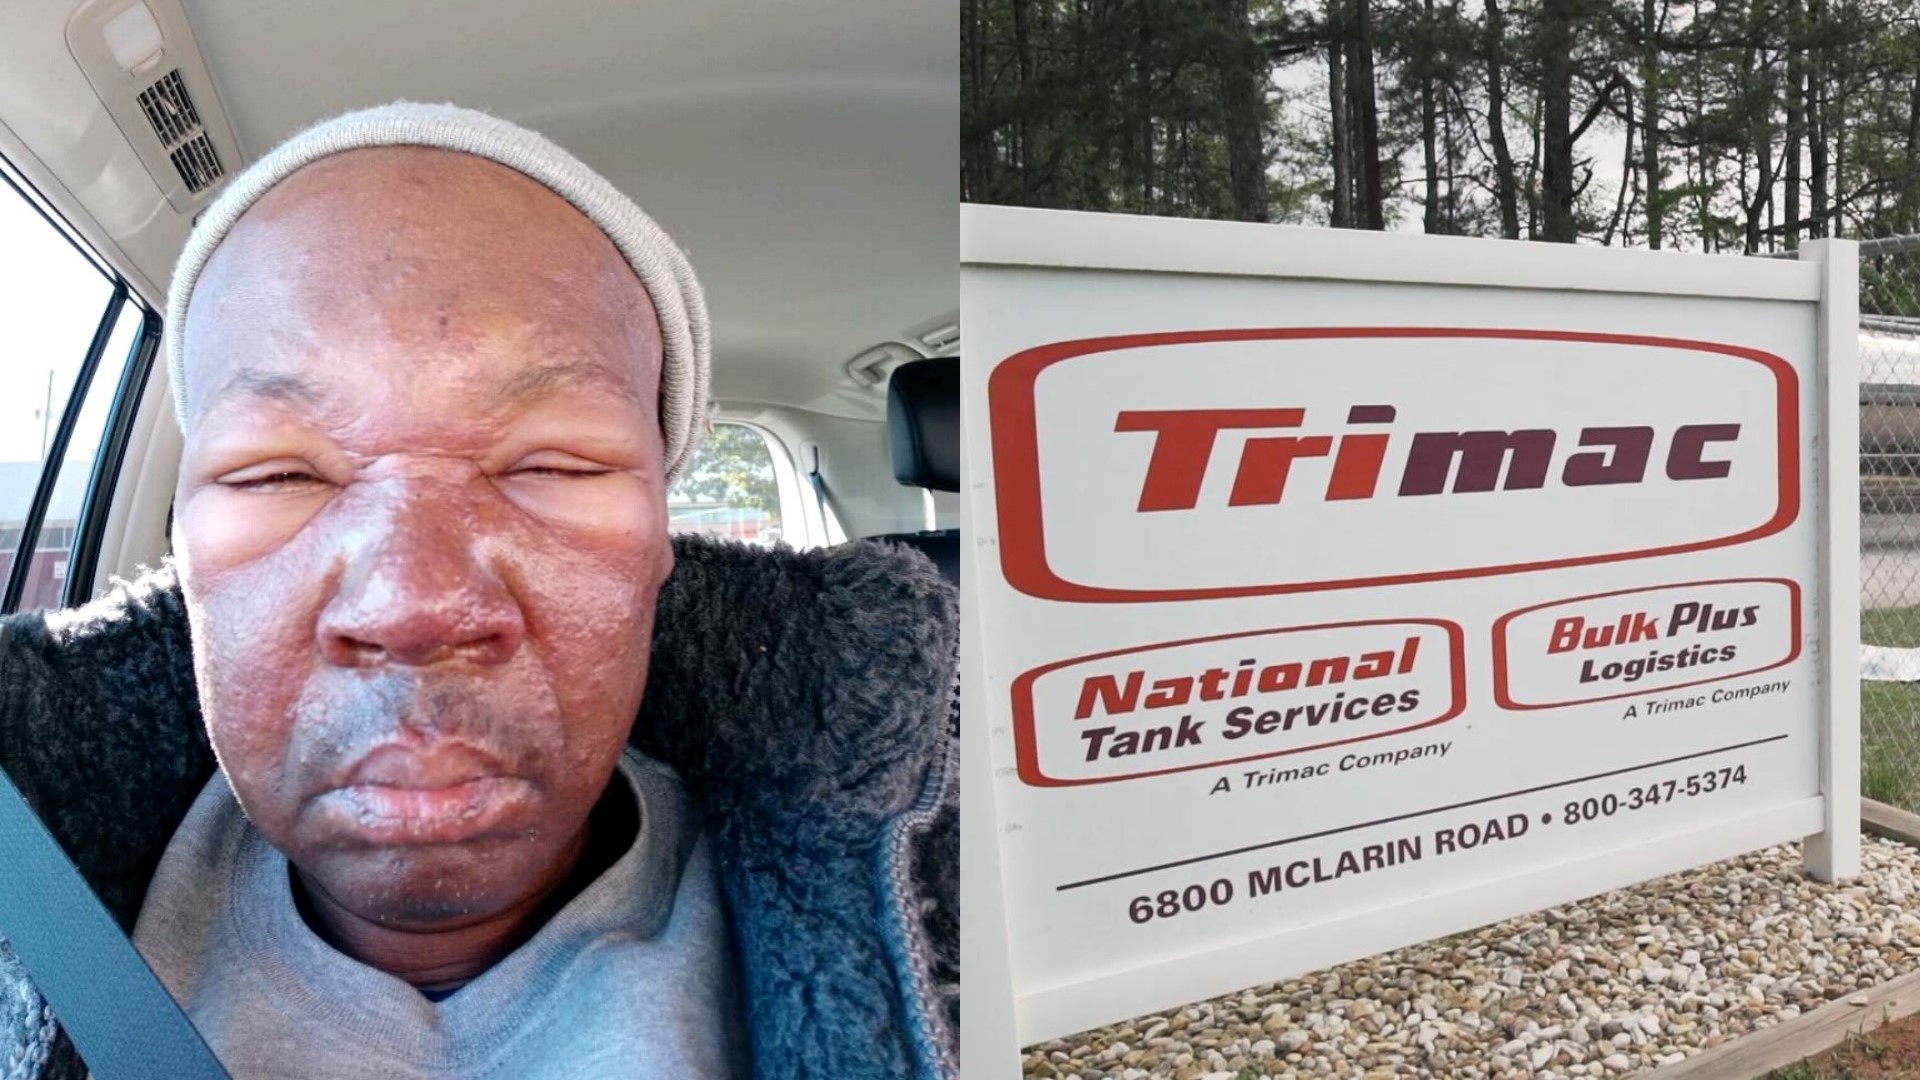 Around a dozen workers, including Demetrius Phillips who died from cancer in August 2021, claim the company they worked for exposed them to dangerous chemicals.